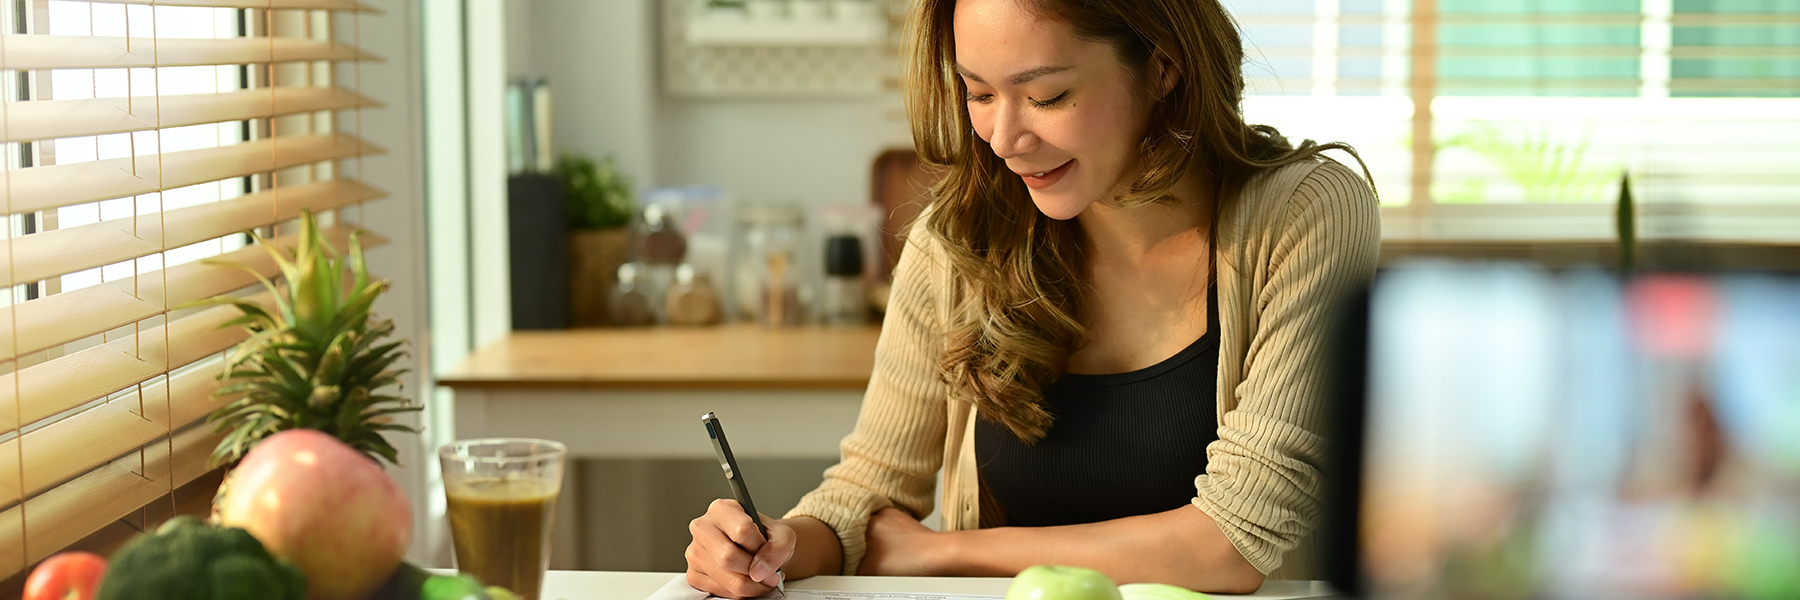 Woman writing at kitchen table surrounded by fruits and vegetables 